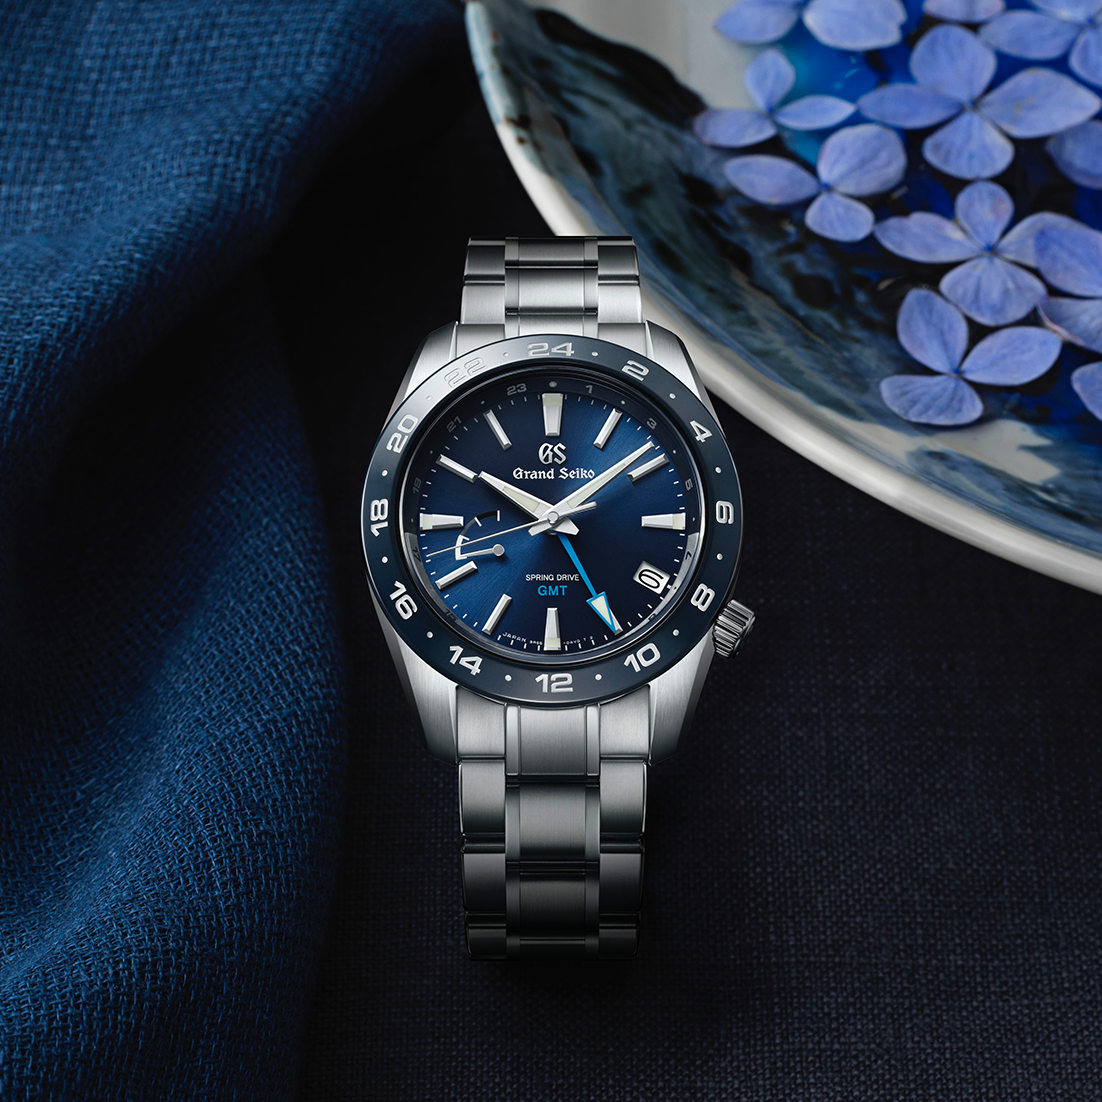 Grand Seiko Spring Drive GMT | Seiko Boutique | The Official UK Online Store